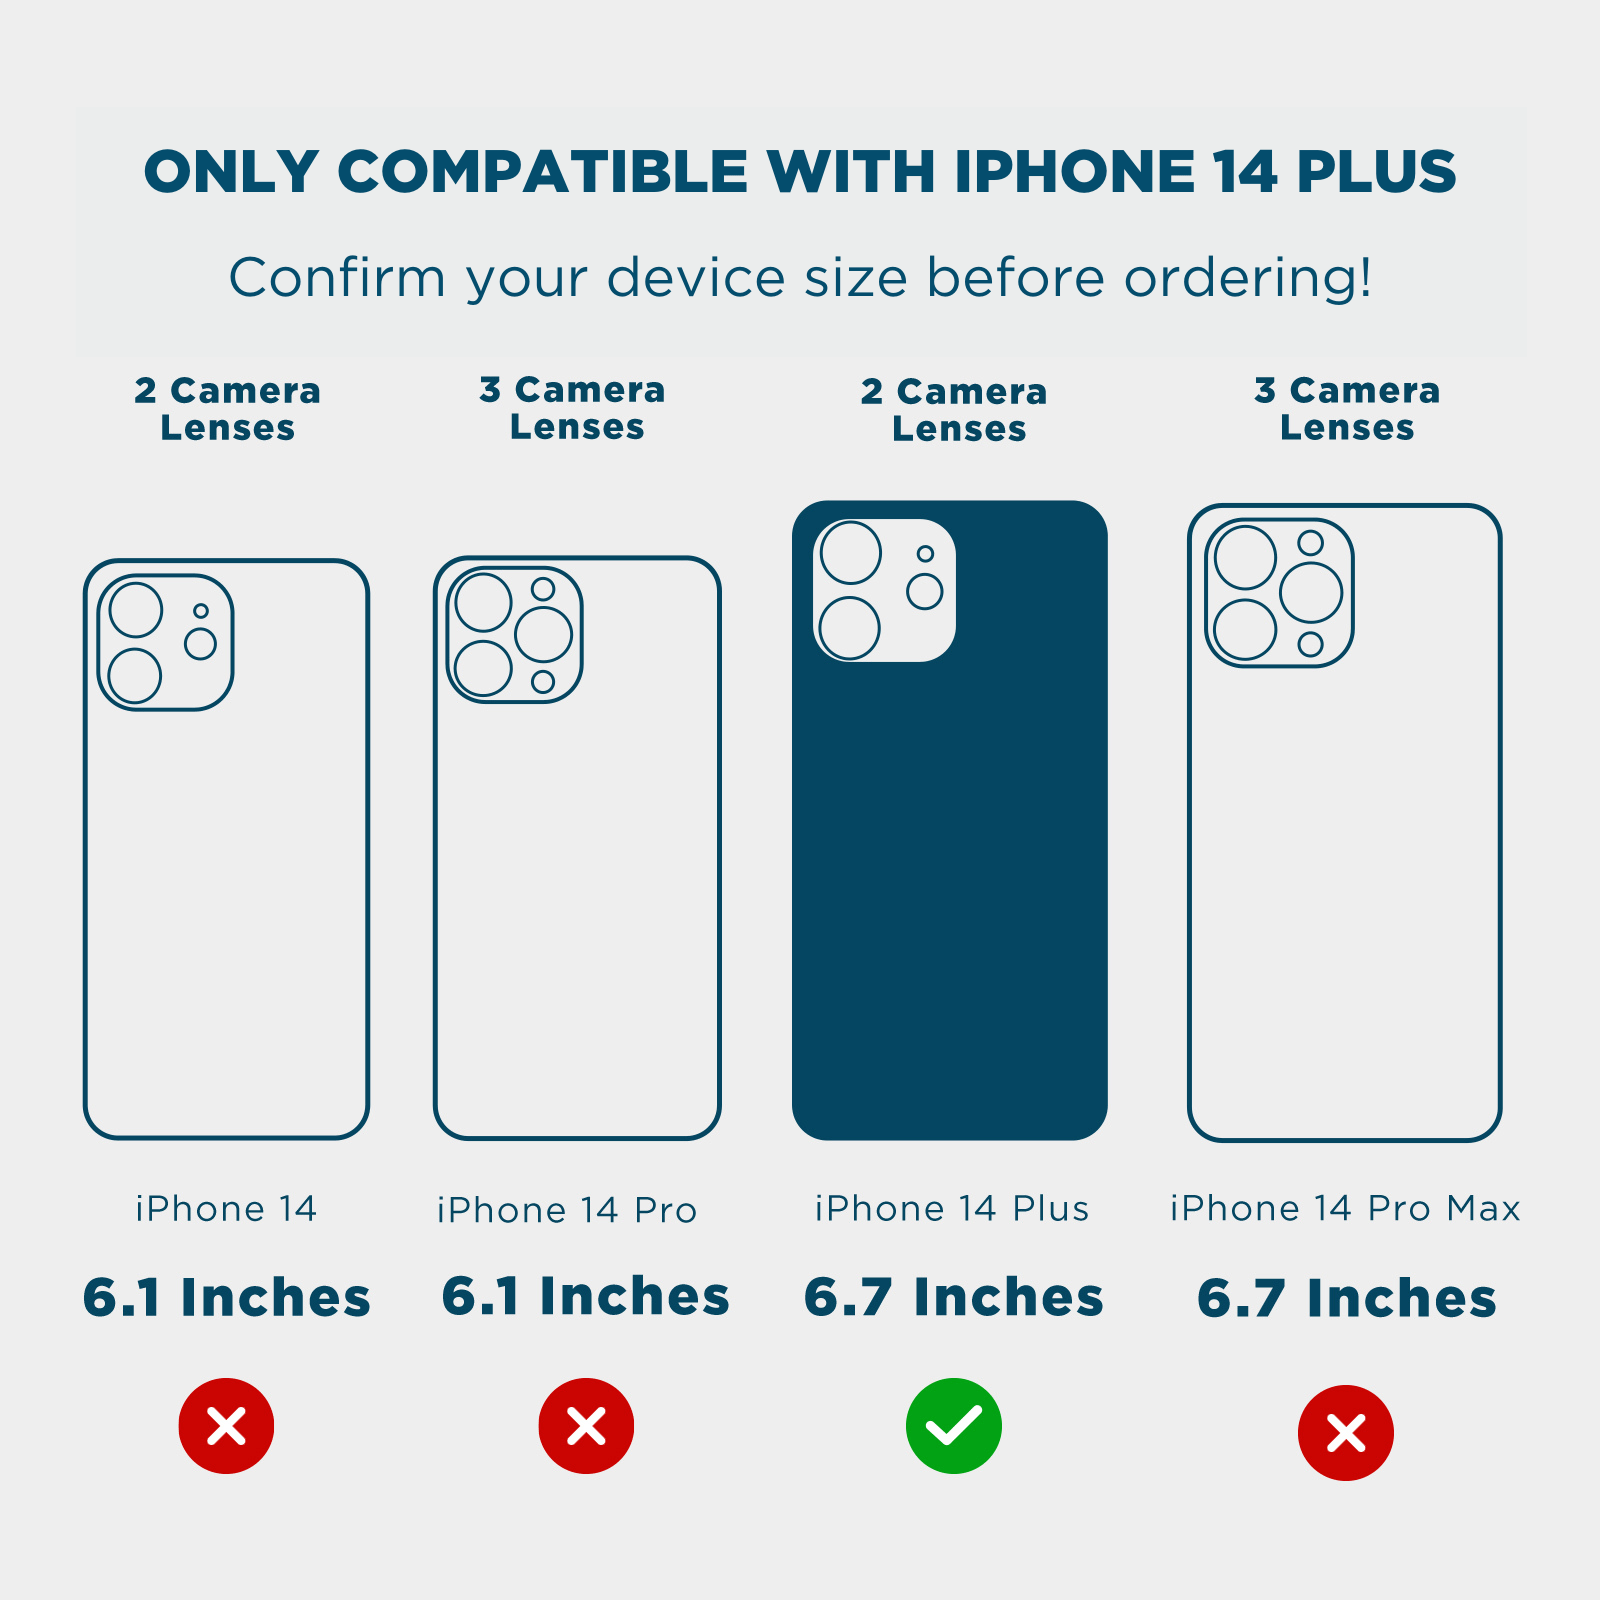 ONLY COMPATIBLE WITH IPHONE 14 PLUS. CONFIRM YOUR DEVICE SIZE BEFORE ORDERING! 2 CAMERA LENSES, 3 CAMERA LENSES, 2 CAMERA LENSES, 3 CAMERA LENSES, 6.1 INCHEC, 6.1 INCHES, 6.7 INCHES, 6.7 INCHES. COLOR::PEARL